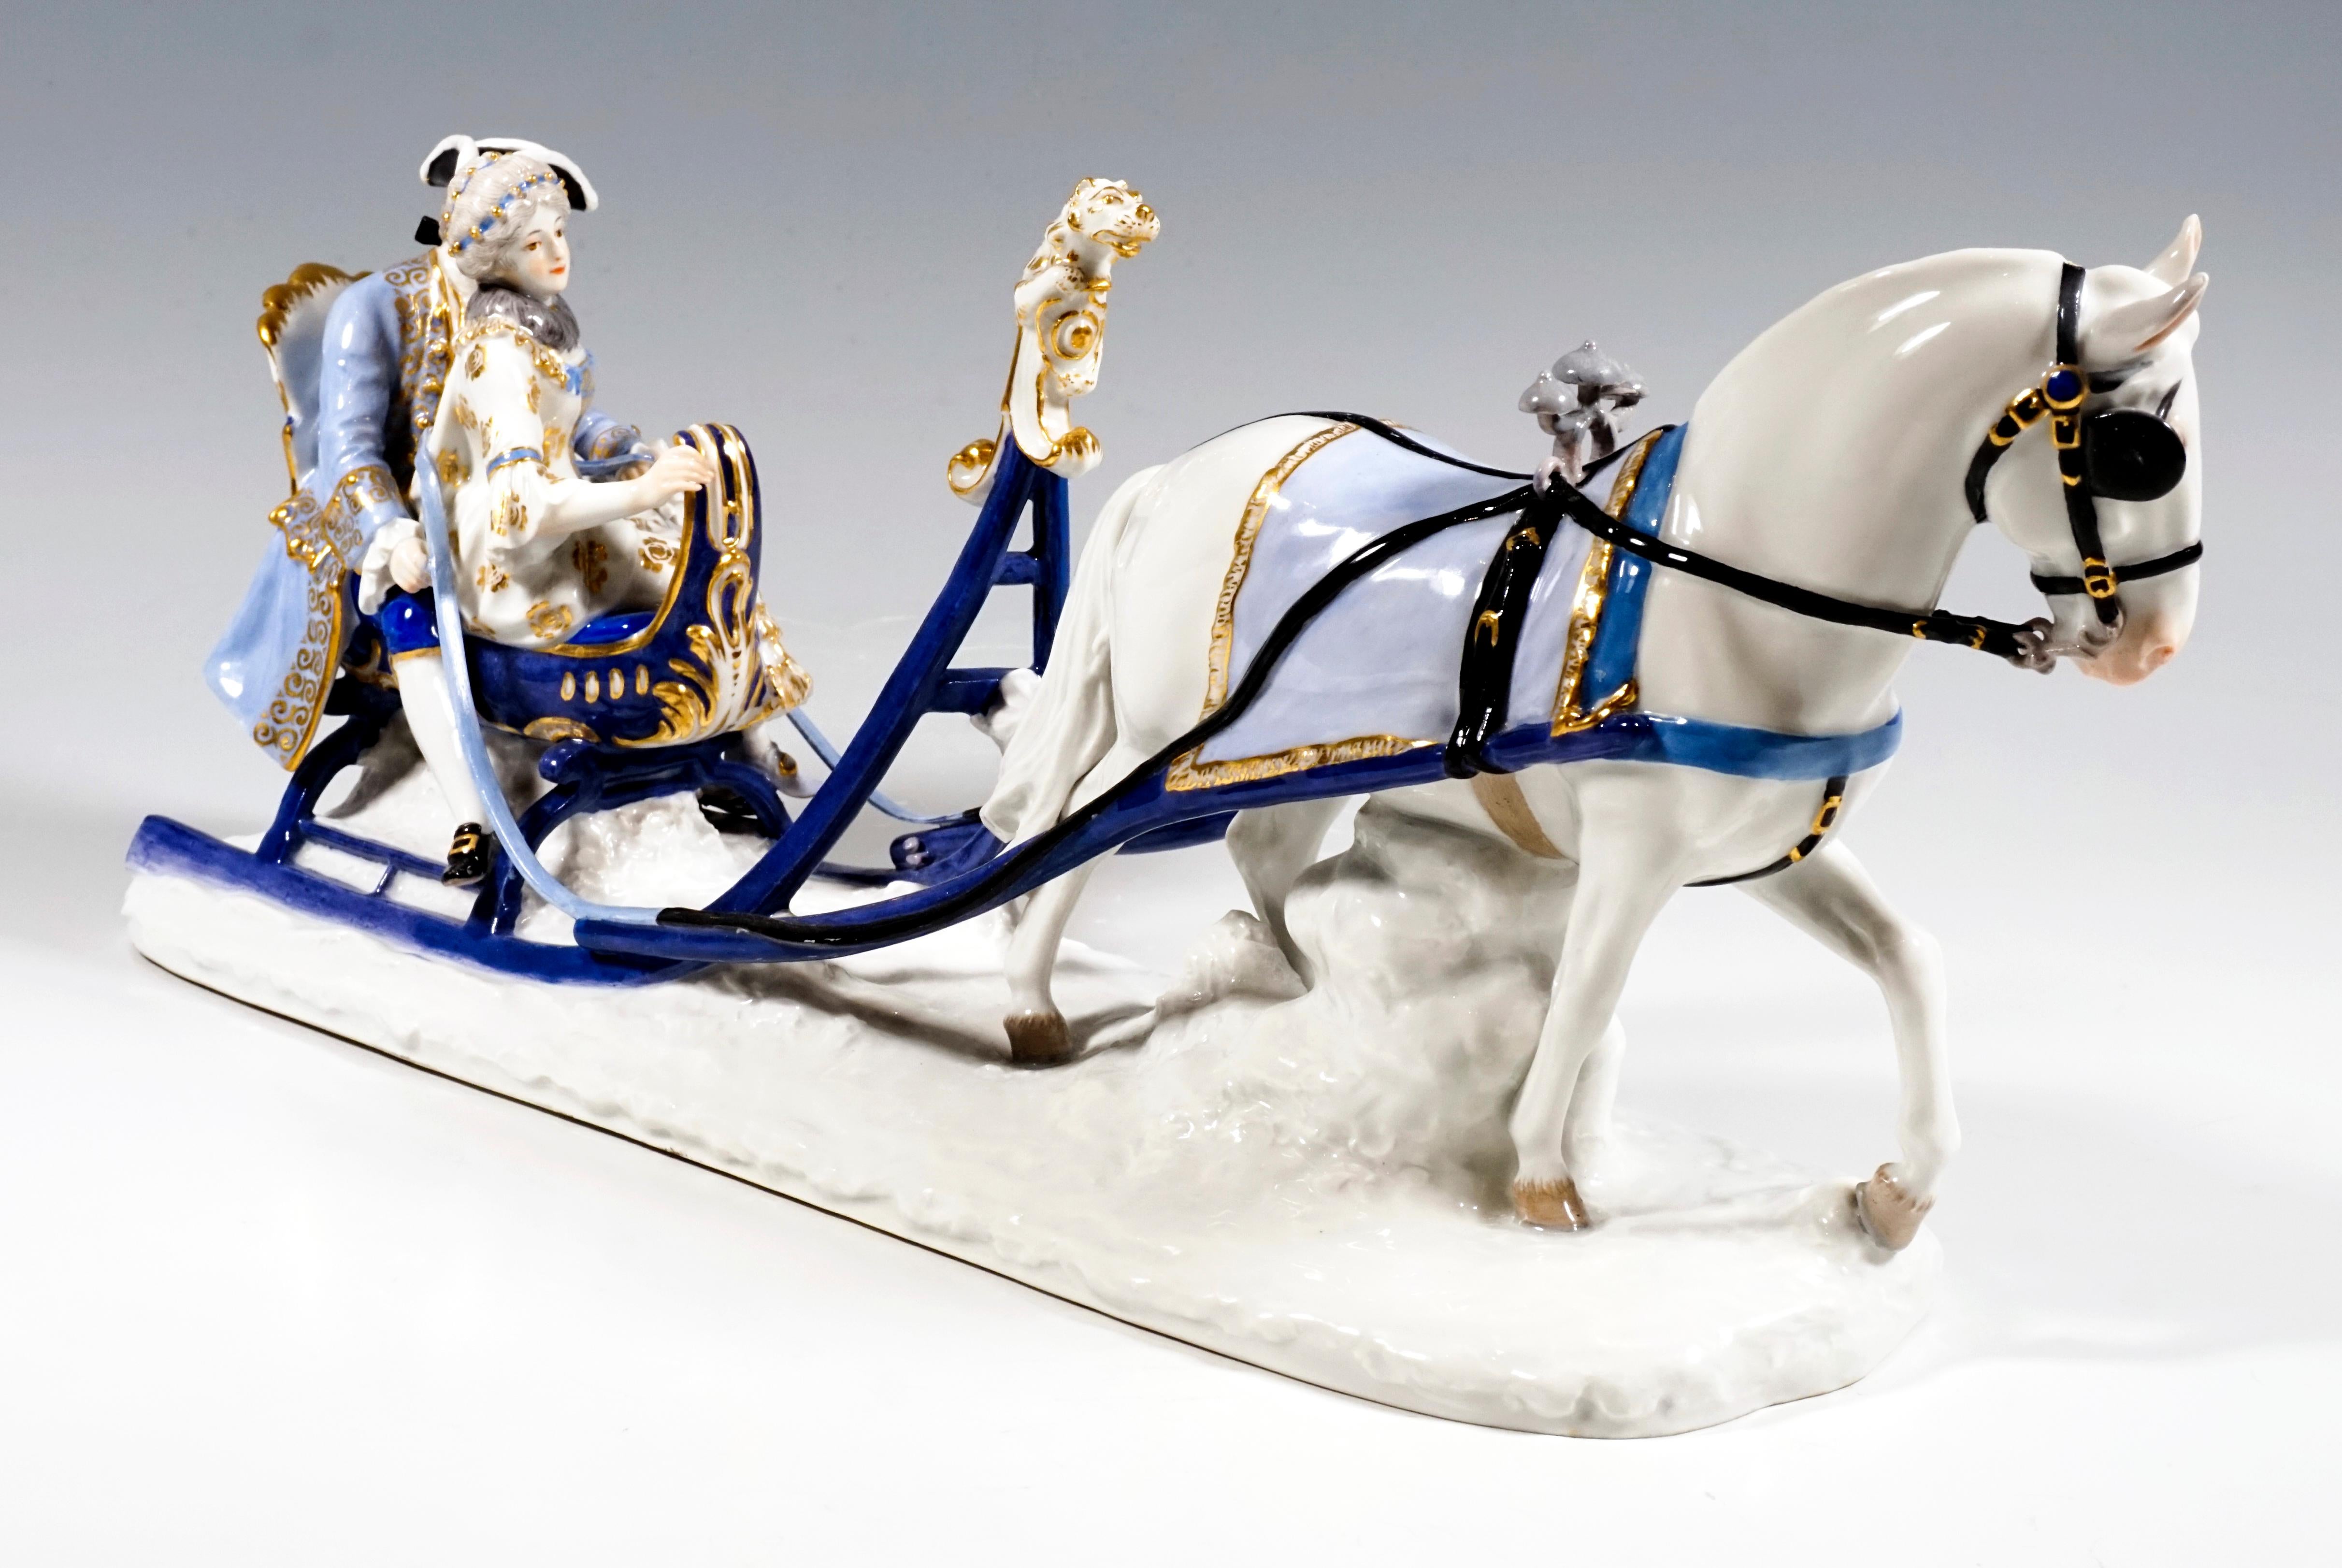 Very seldom executed Meissen figurine group.
On an elongated snow plinth, a gallant couple is pulled on a blue sleigh by a noble, white horse with a blue, gold-framed blanket, blinkers and bells. The sleigh is equipped with white, gold-raised